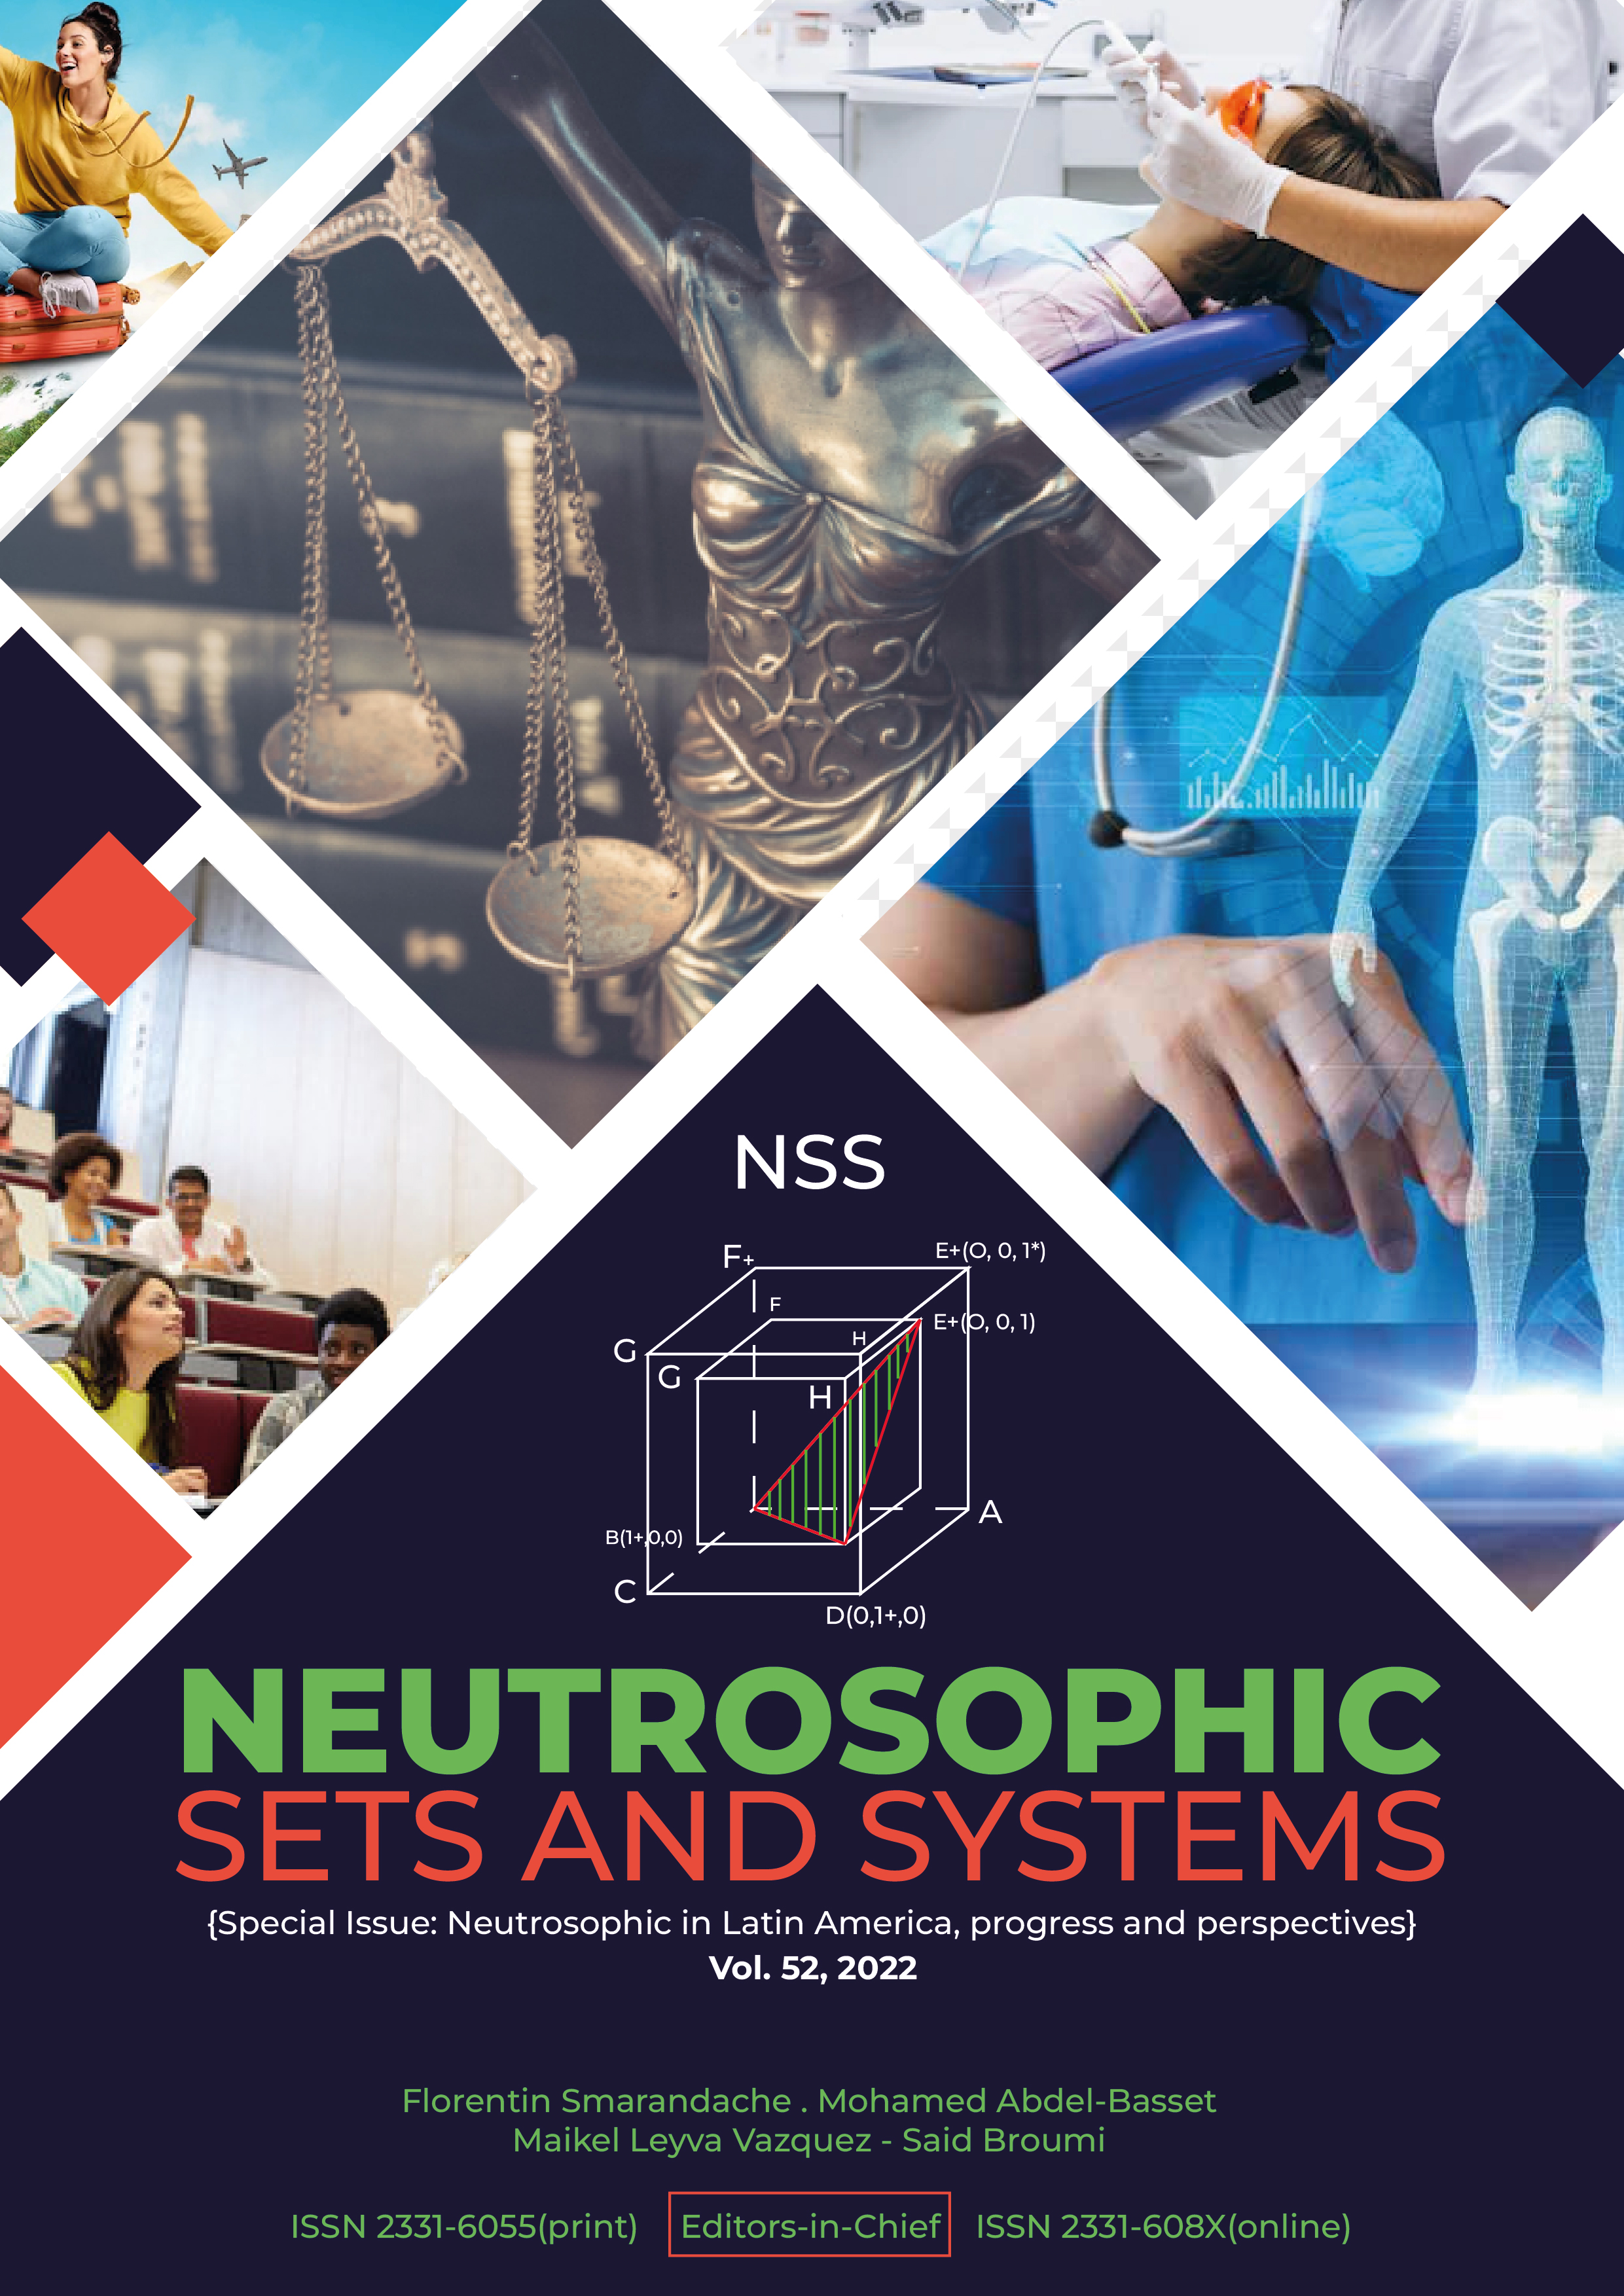 					View Vol. 52 (2022): Neutrosophic Sets and Systems {Special Issue: Neutrosophic in Latin America, progress and perspectives}
				